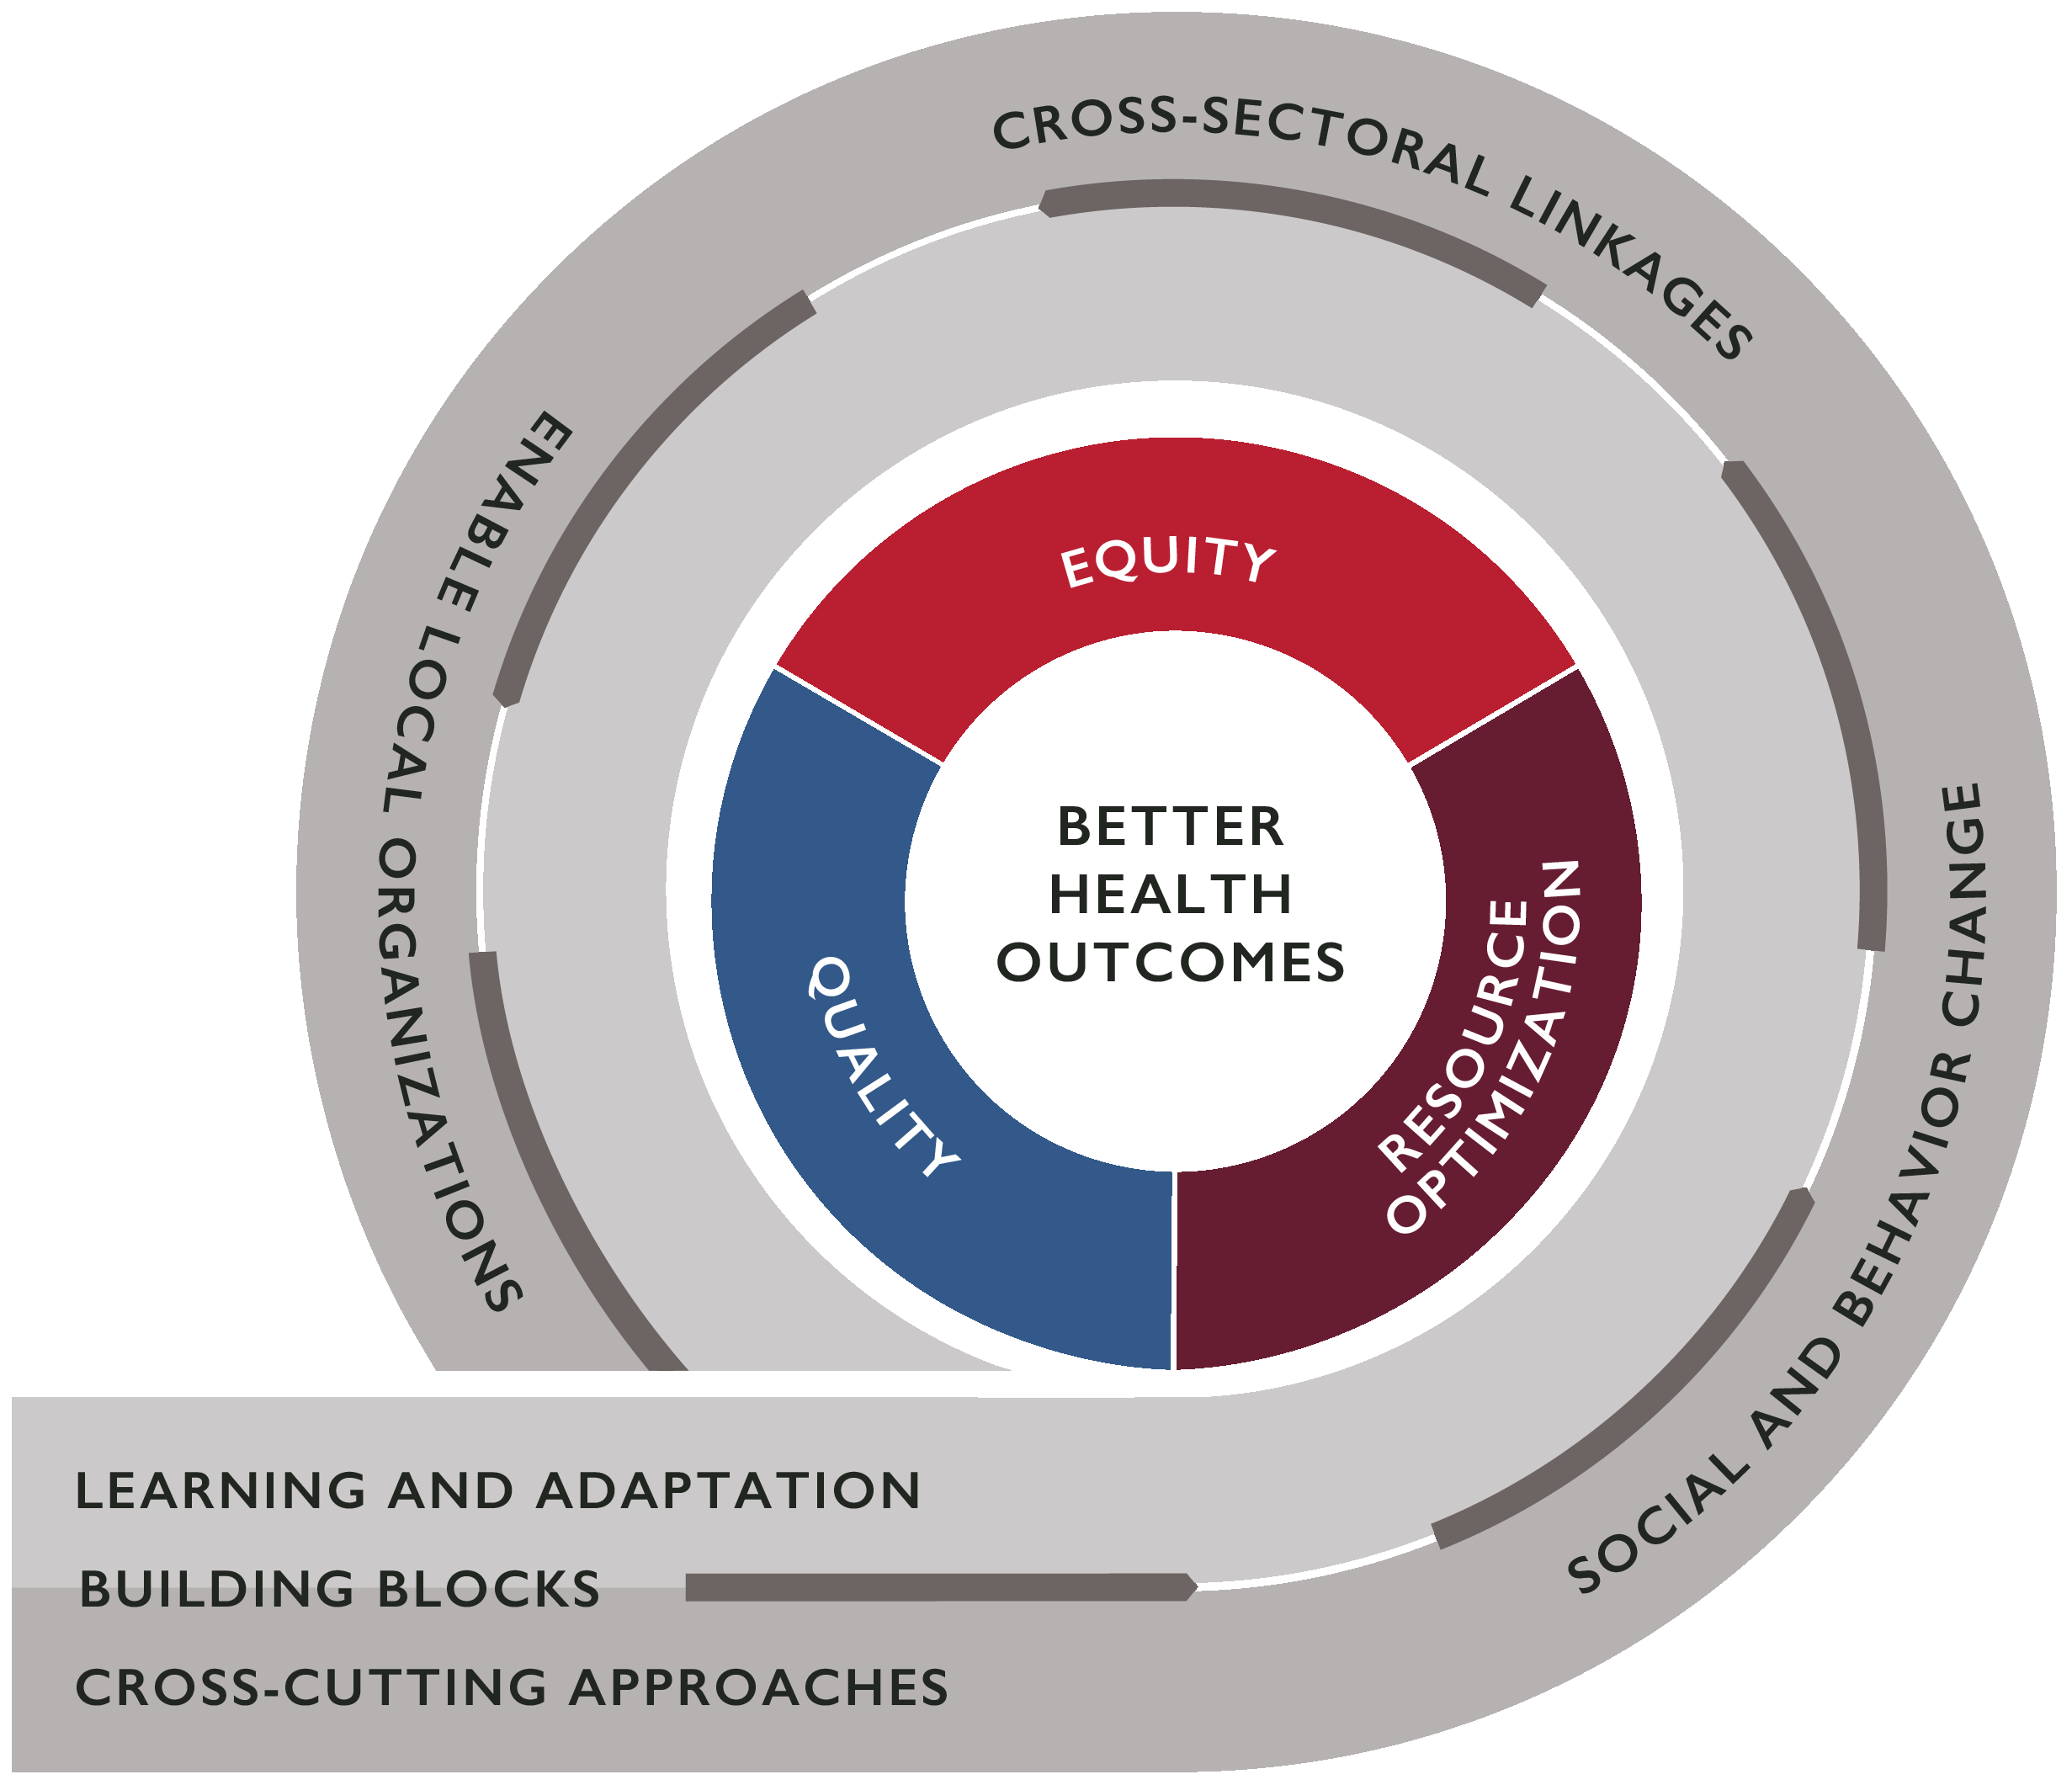 Circular graphic: Building Blocks, Learning & Adaptation, Cross-cutting Approaches, Social & Behavior Change, Cross-sectoral Linkages, Enable Local Organizations, Equity | Quality | Resource Optimization, Better Health Outcomes